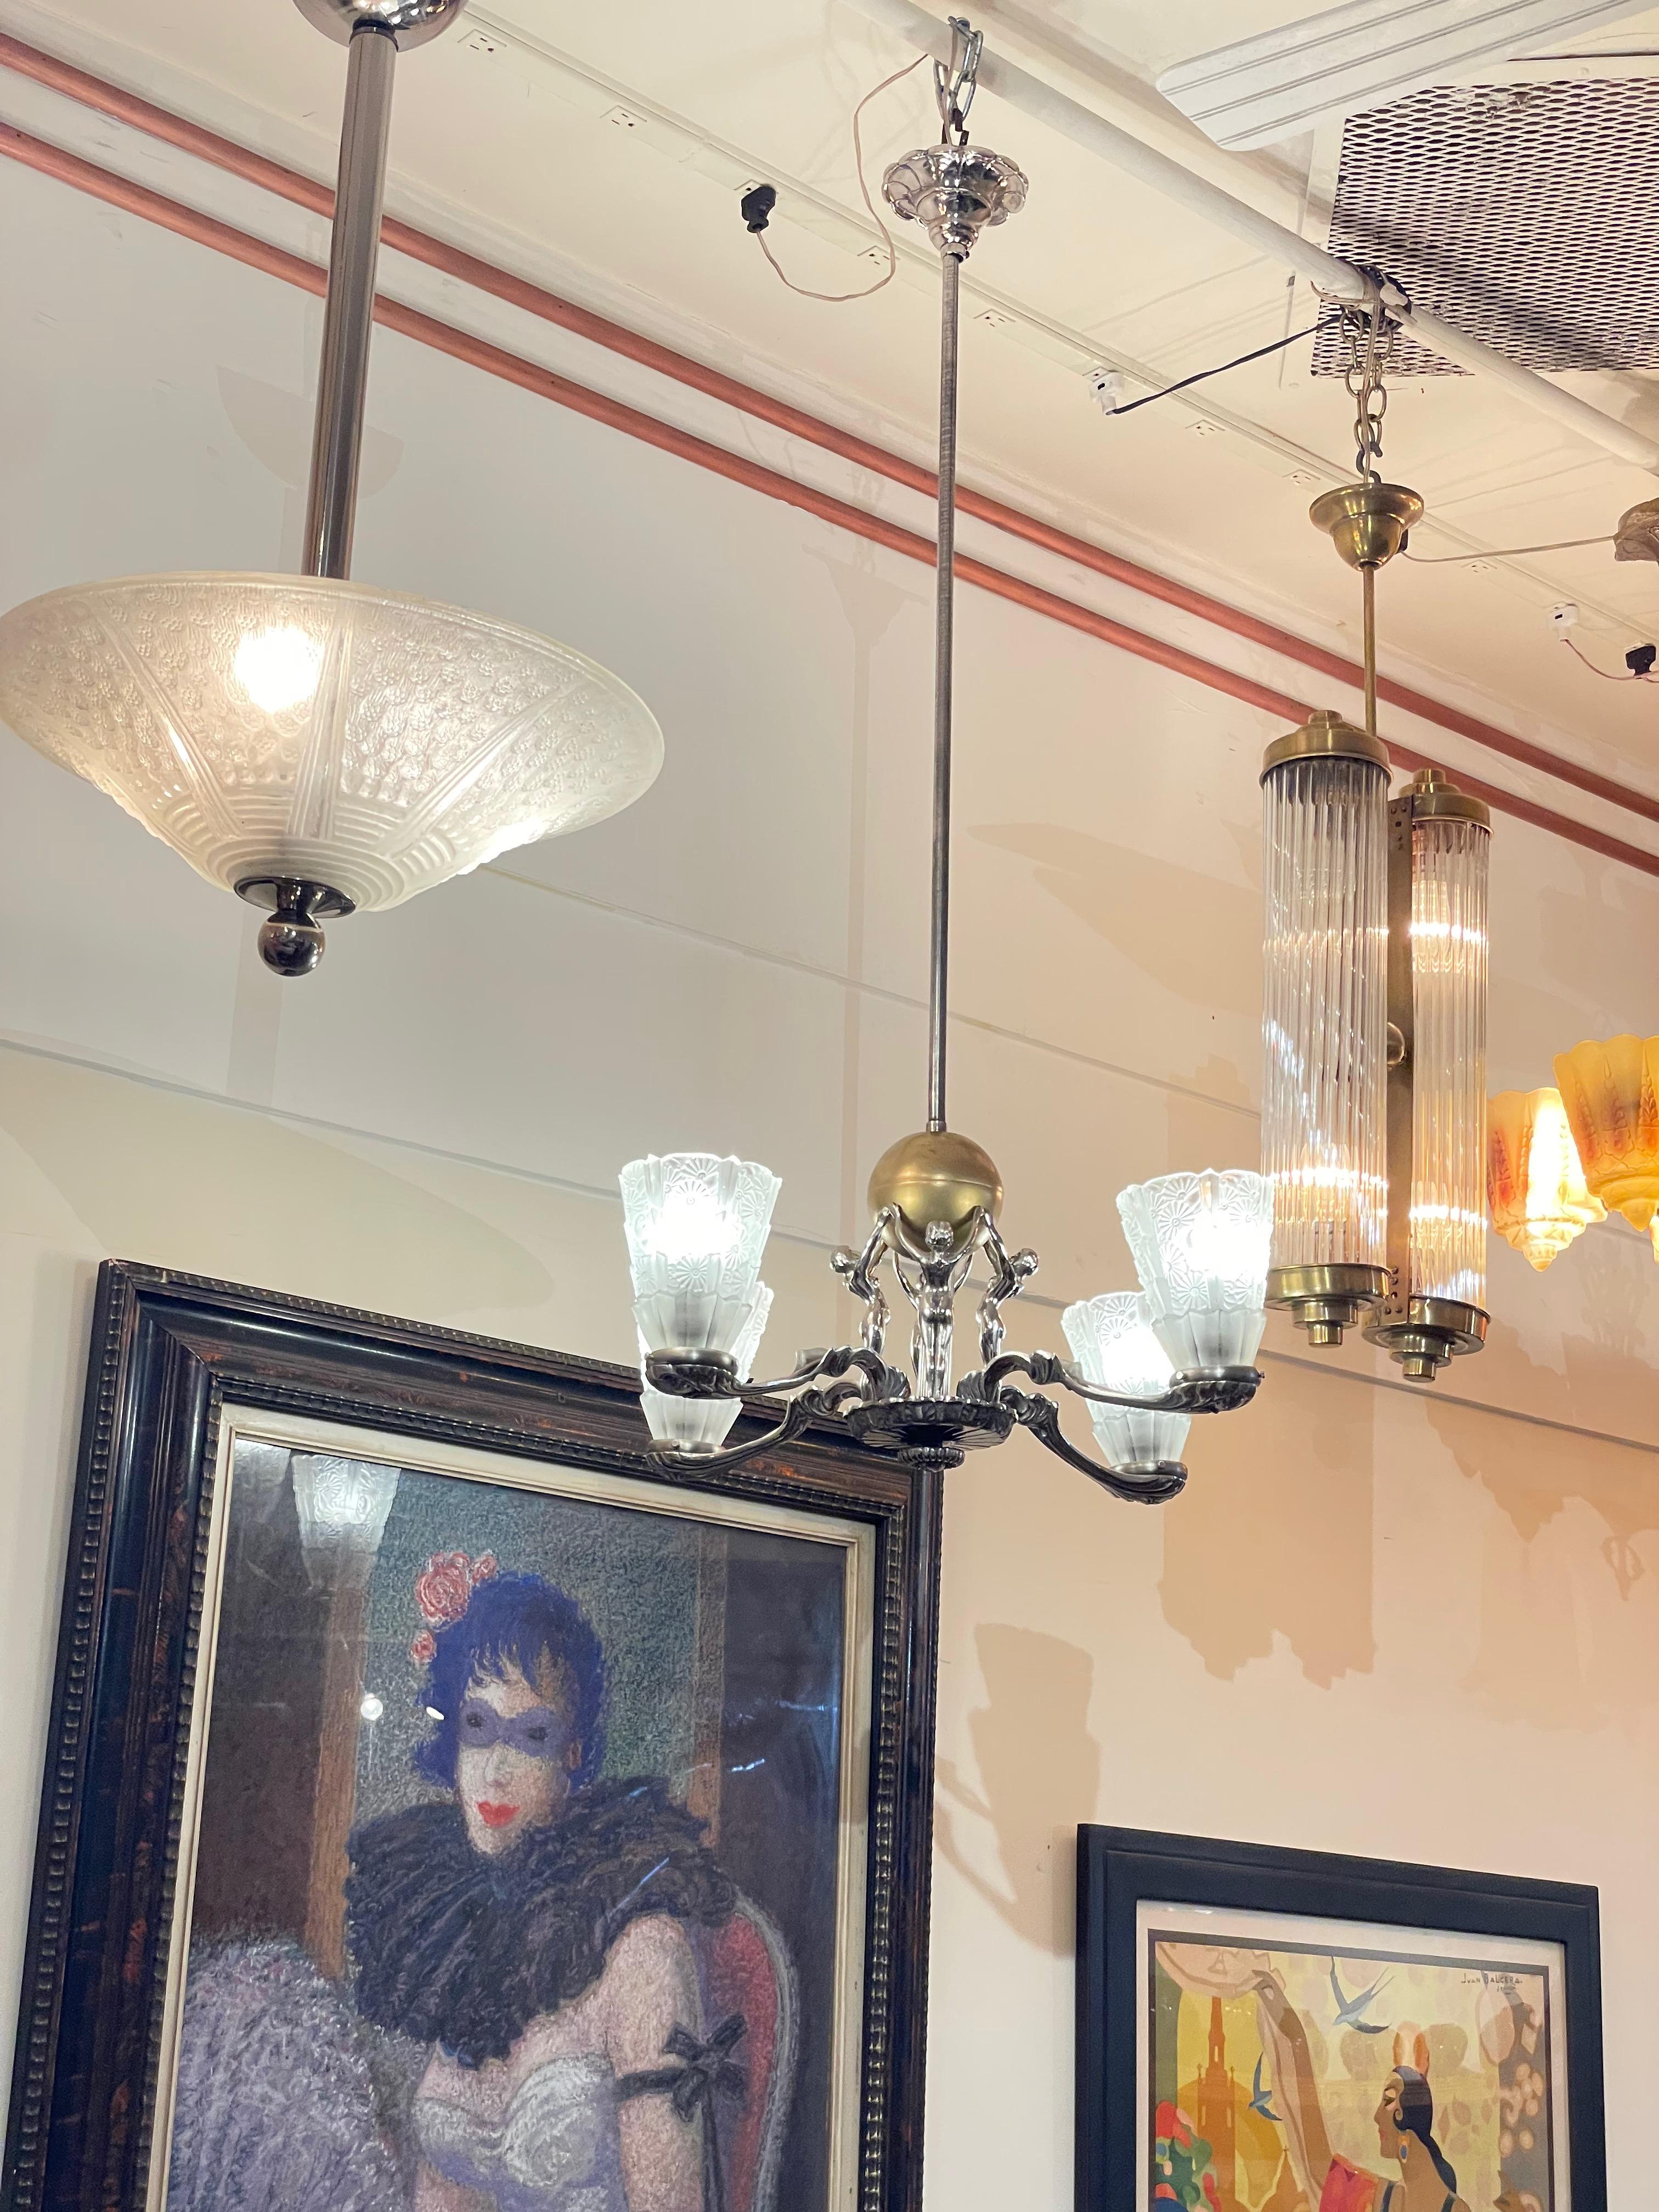 An Art Deco Chandelier with four silvered sculptural female nudes holding up a golden ball as the centerpiece. Four French pressed floral frosted glass shades and unusual metalwork throughout make this a truly unique lighting fixture. The women